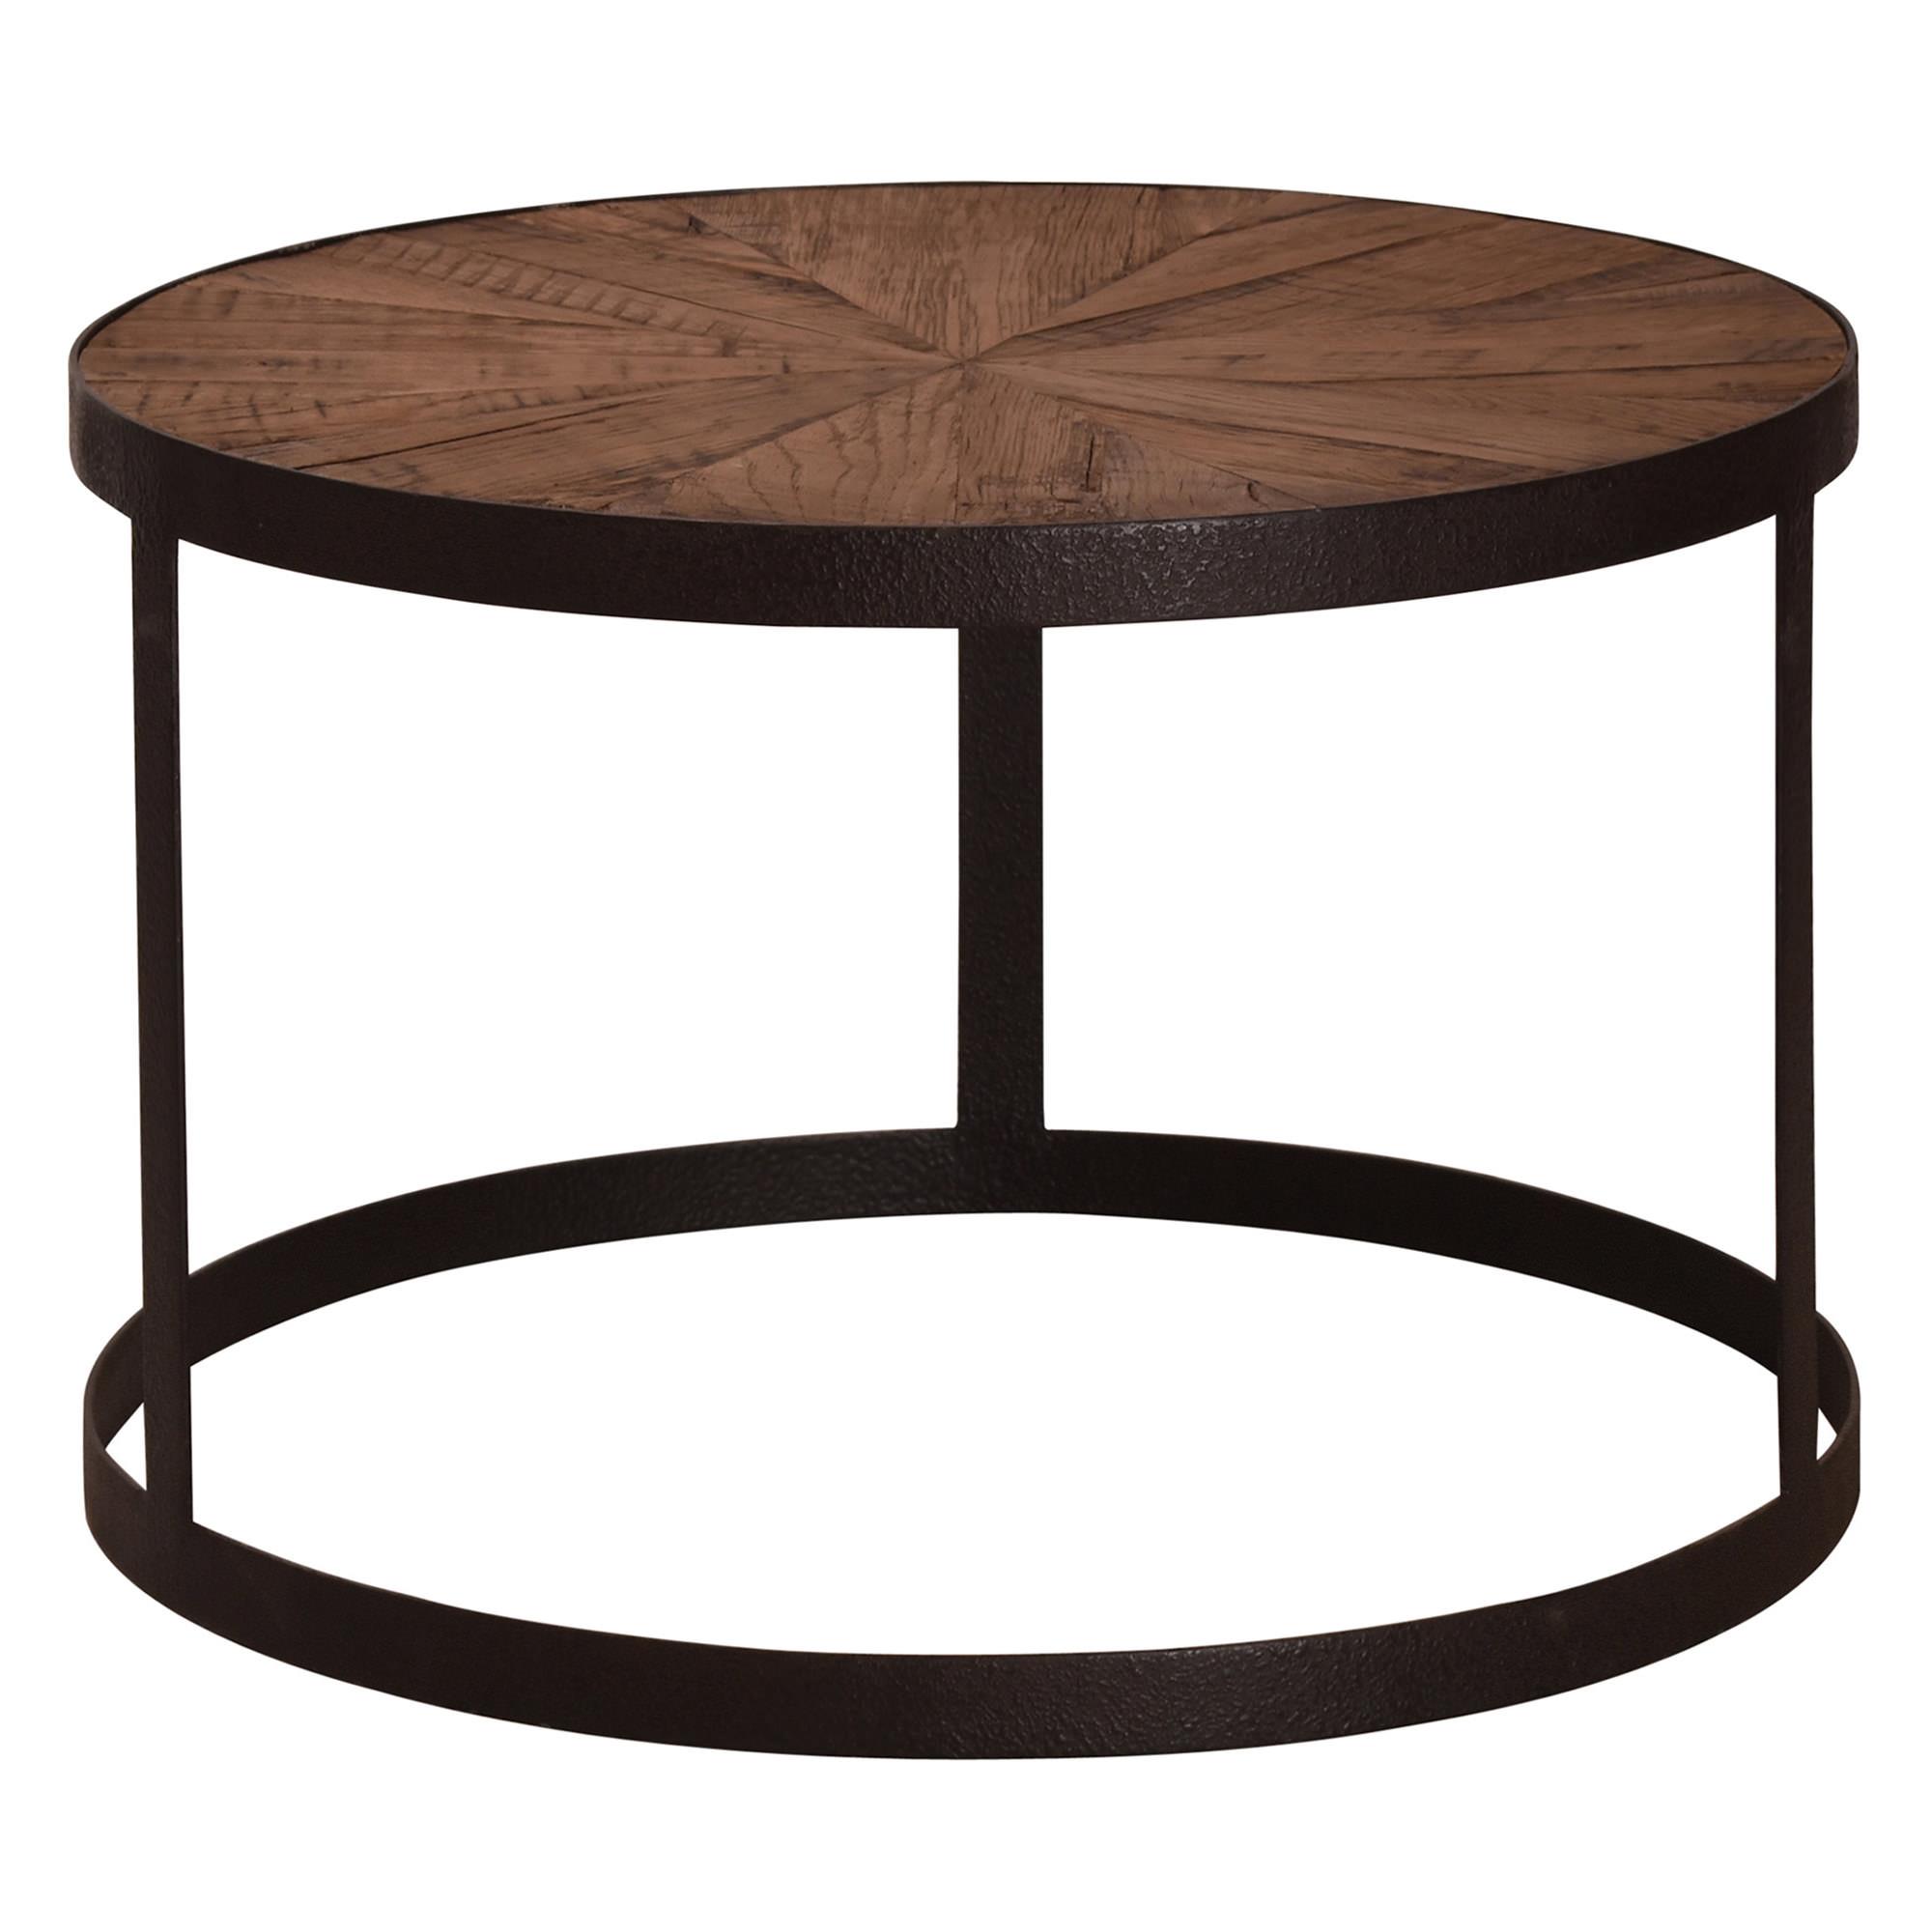 Elford Reclaimed Timber & Iron Round Coffee Table, 60cm